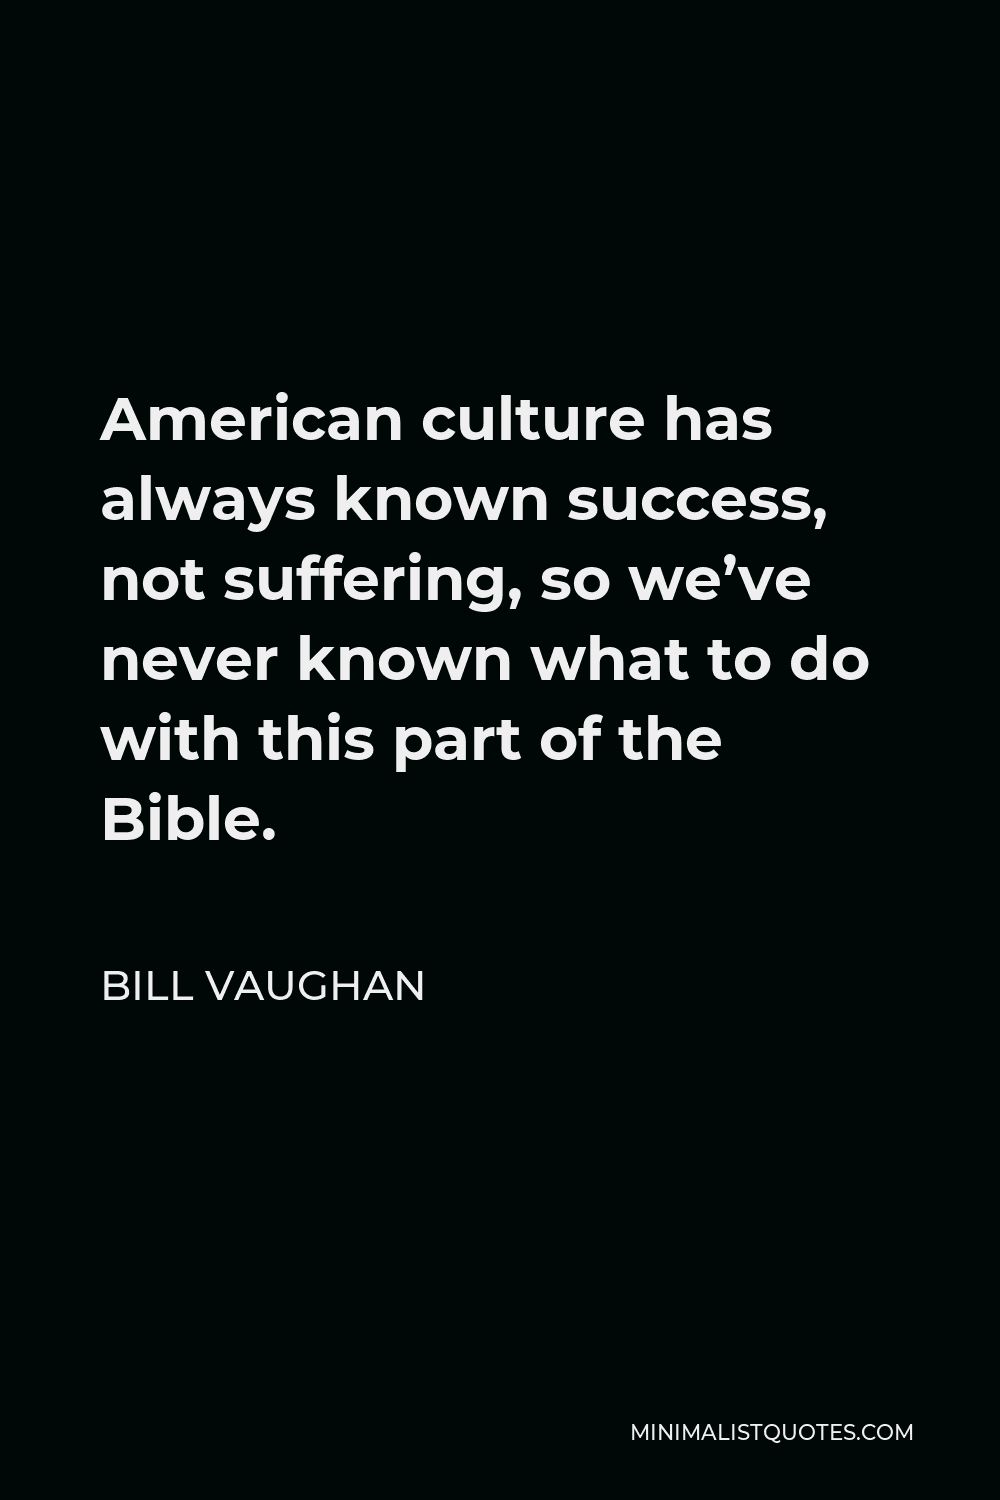 Bill Vaughan Quote - American culture has always known success, not suffering, so we’ve never known what to do with this part of the Bible.